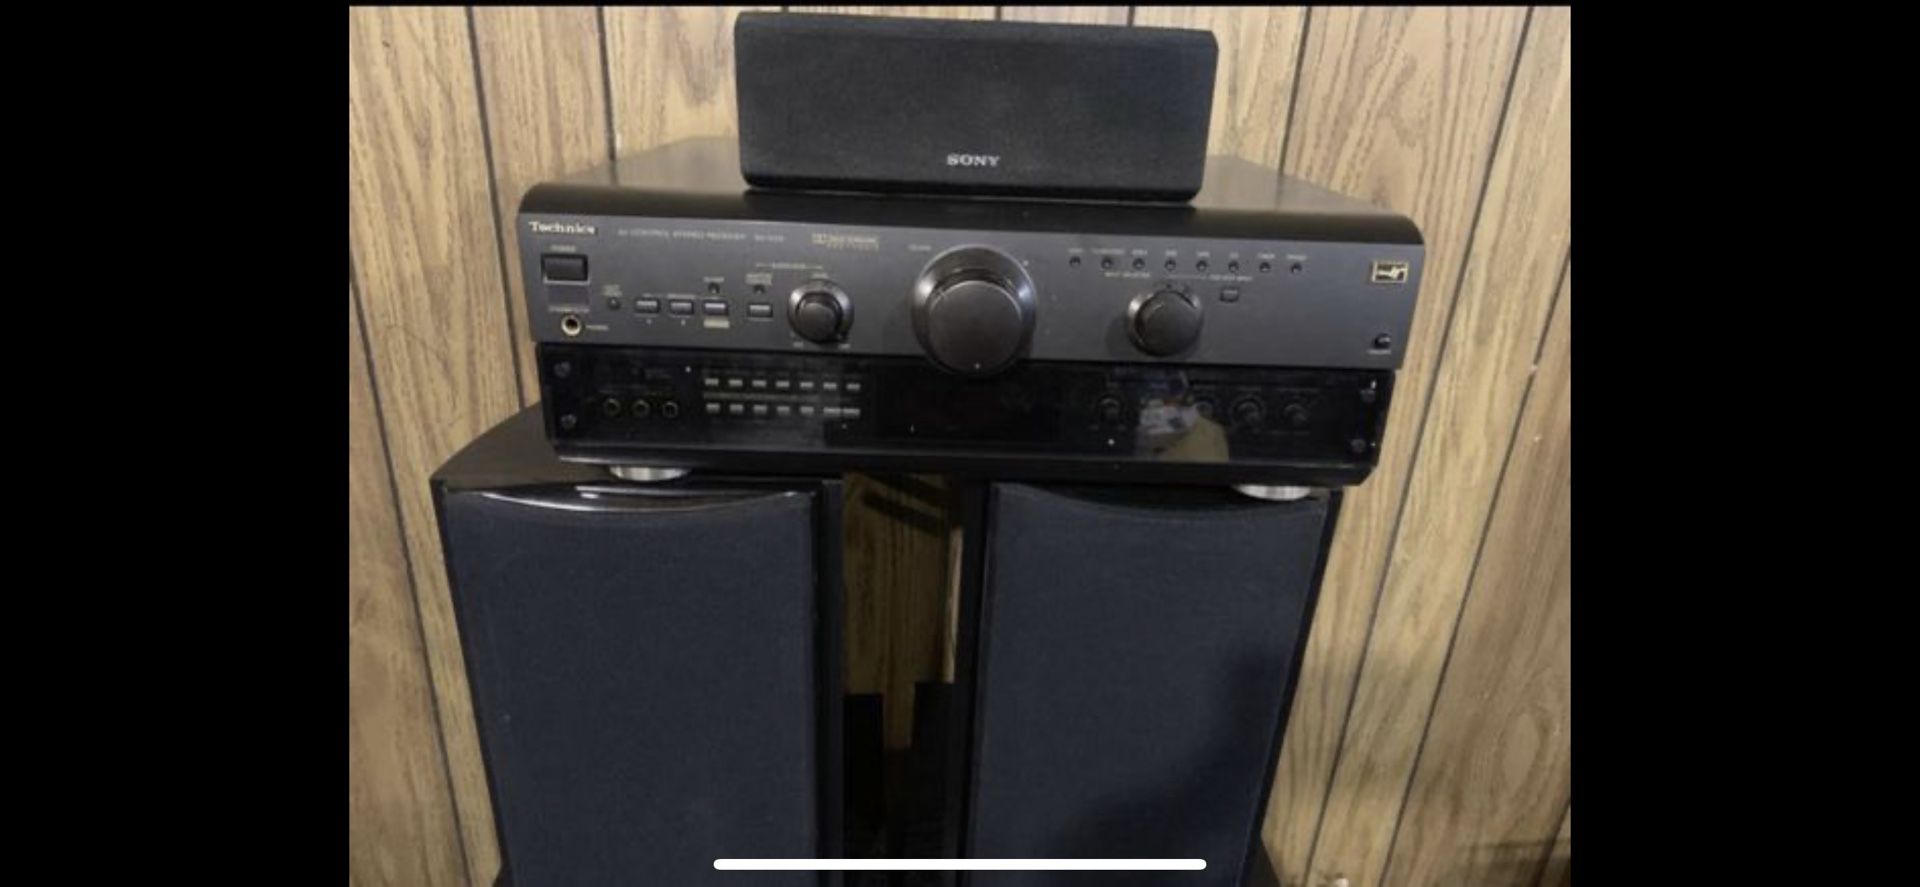 Technics stereo receiver and speakers Sony, Insignia